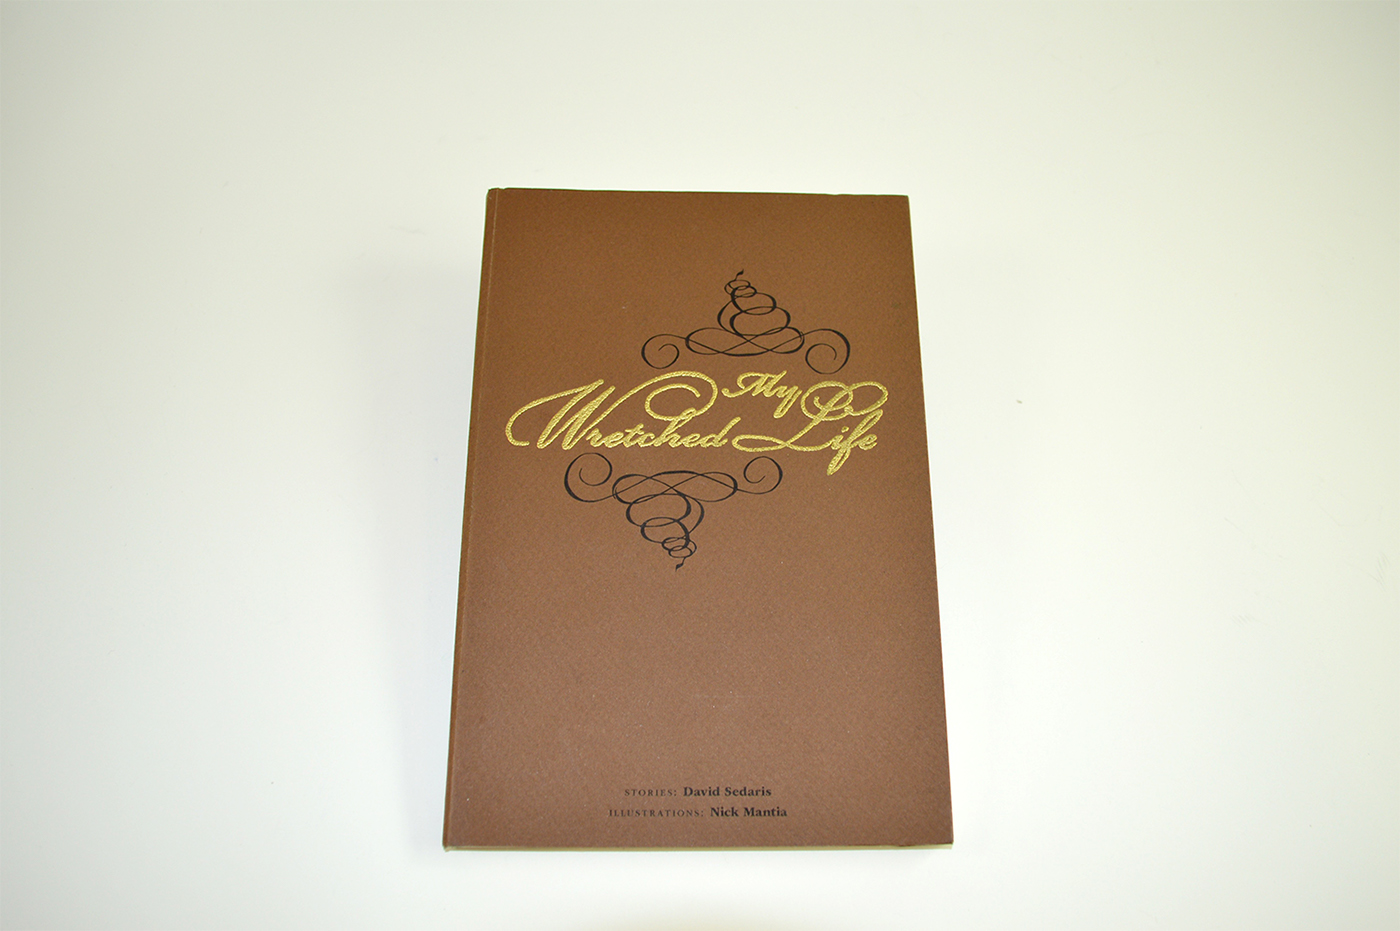 umsl Classical book david sedaris owl wretched Nick mantia lettering hand French fold Bind